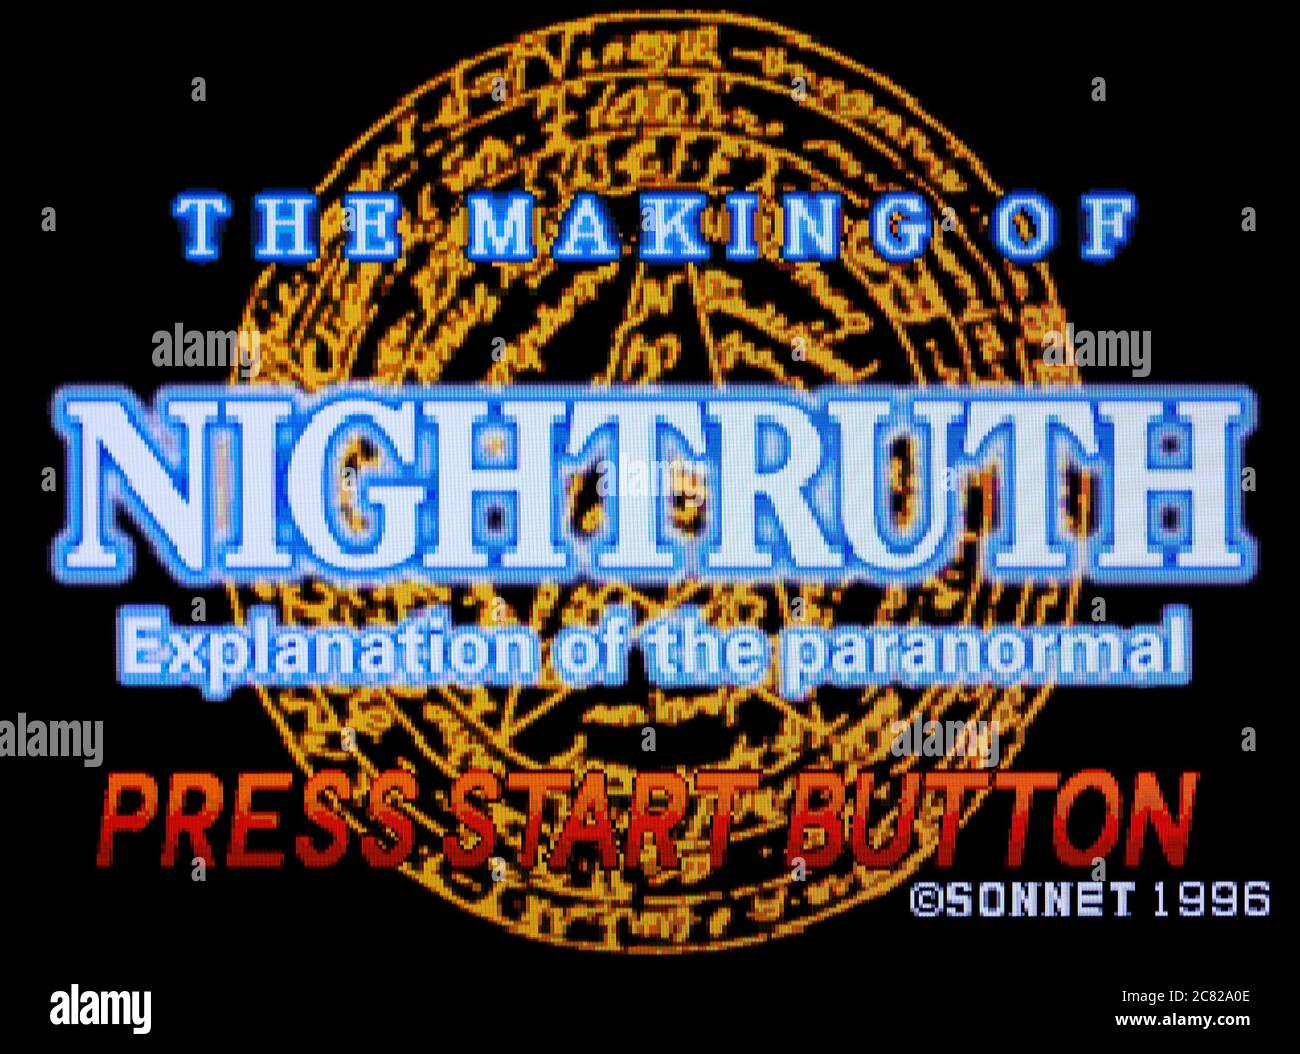 Nightruth - Explanation of the Paranormal - The making of Nightruth - Sega Saturn Videogame - Editorial use only Stock Photo